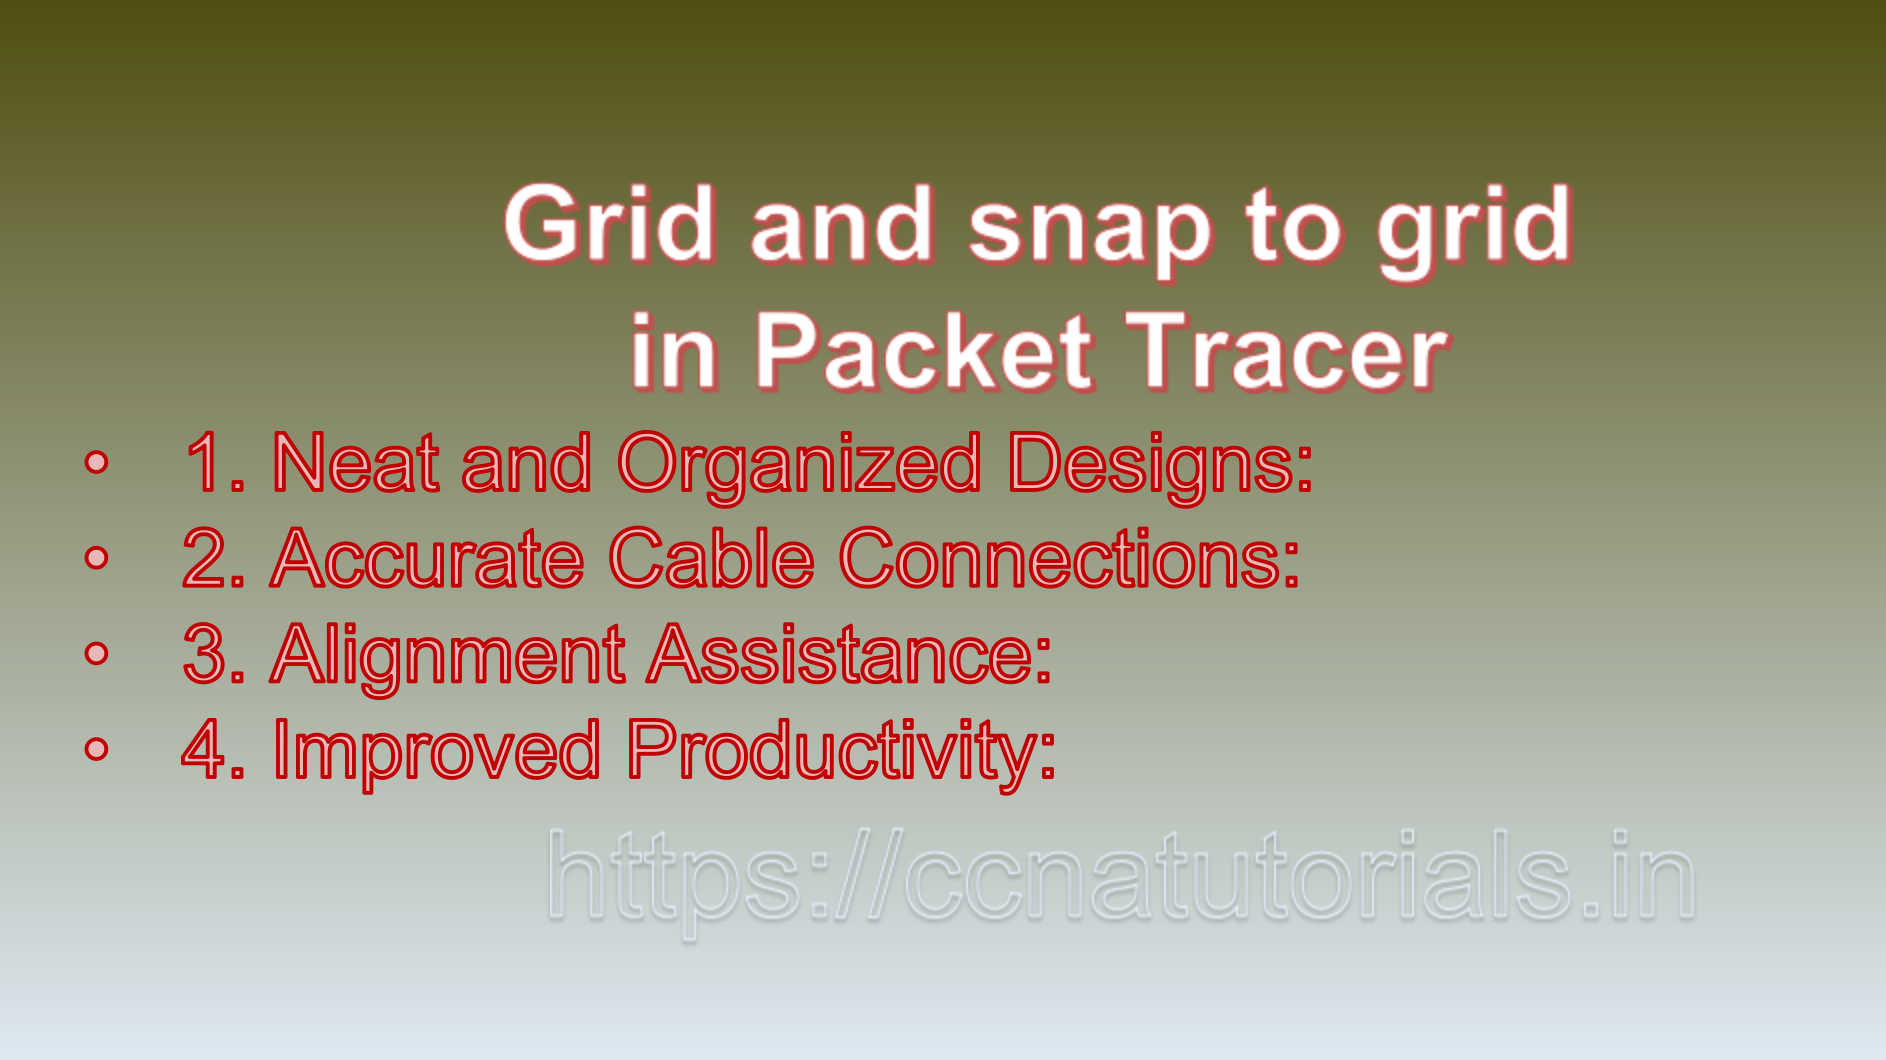 Grid and snap to grid in Packet Tracer, ccna, ccna tutorials